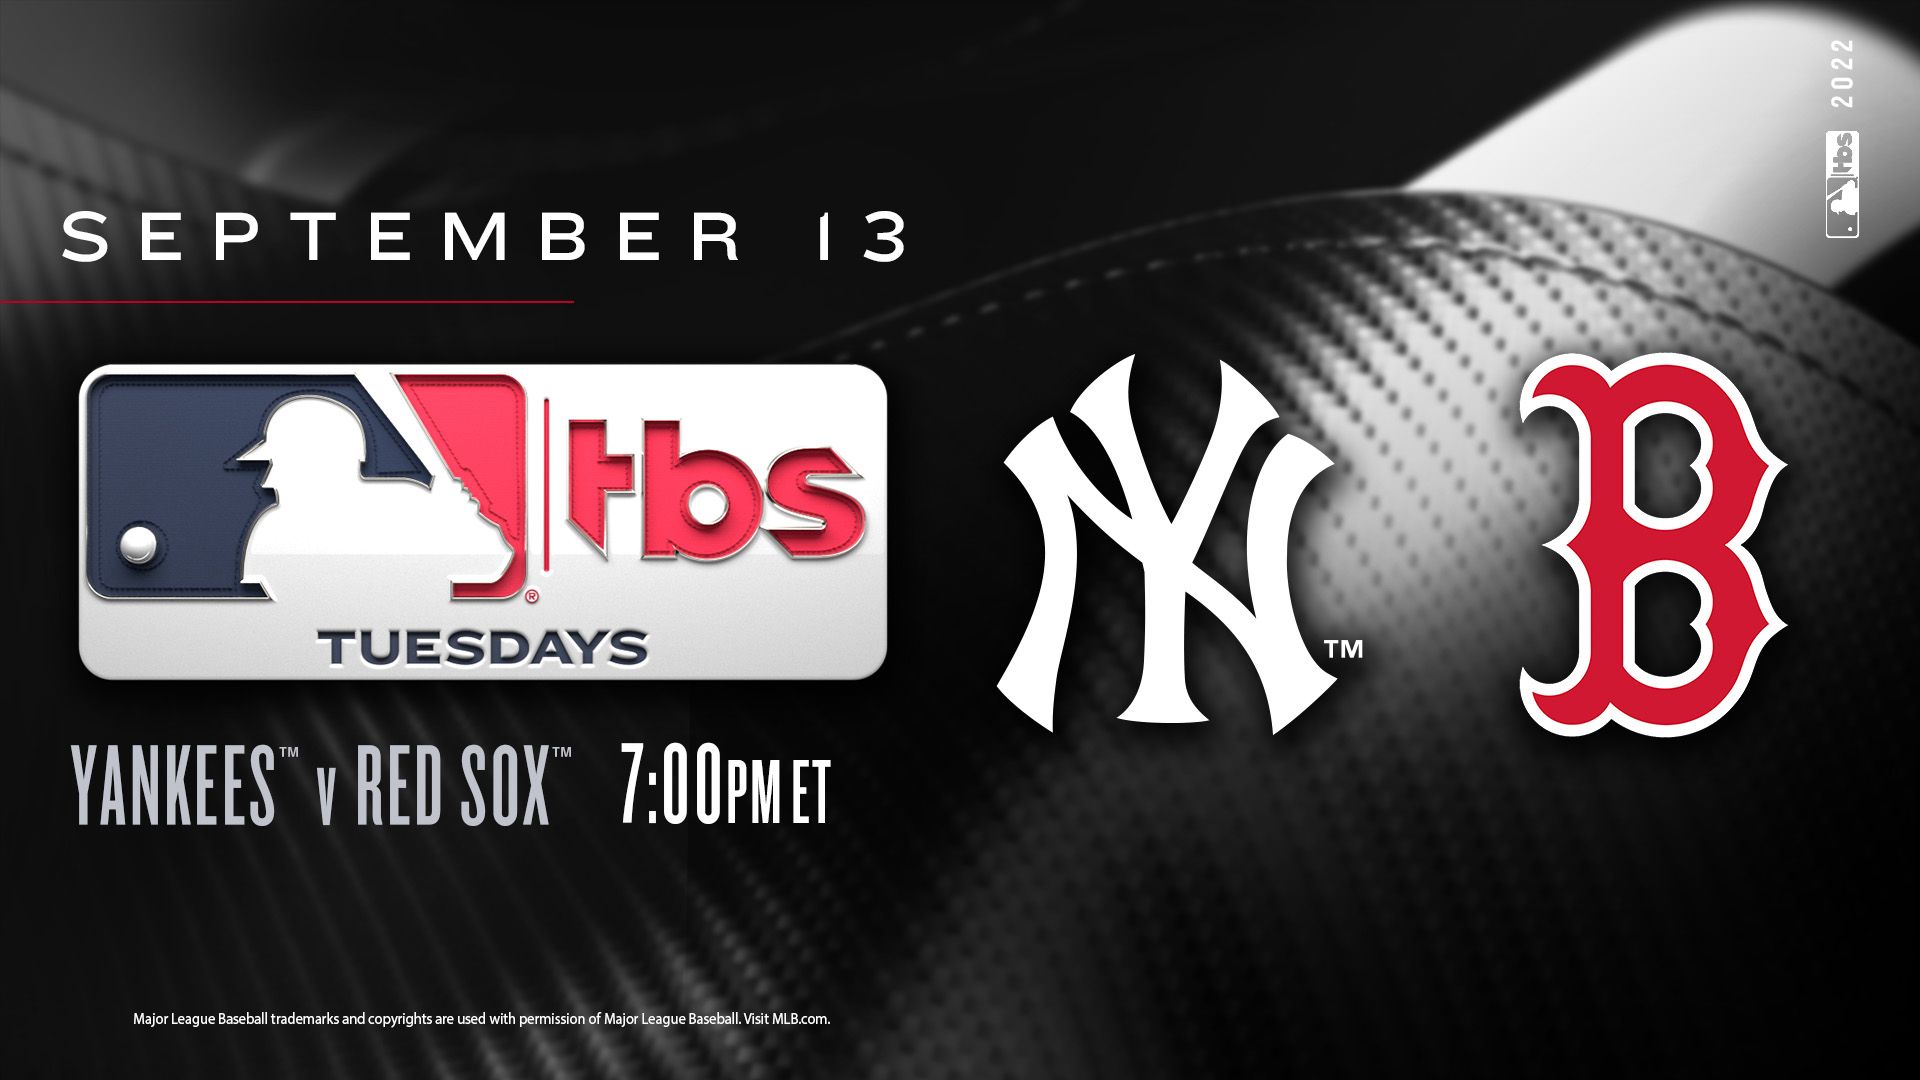 MLB on TBS Tuesday Night to Feature Aaron Judge and the New York Yankees in Consecutive Weeks